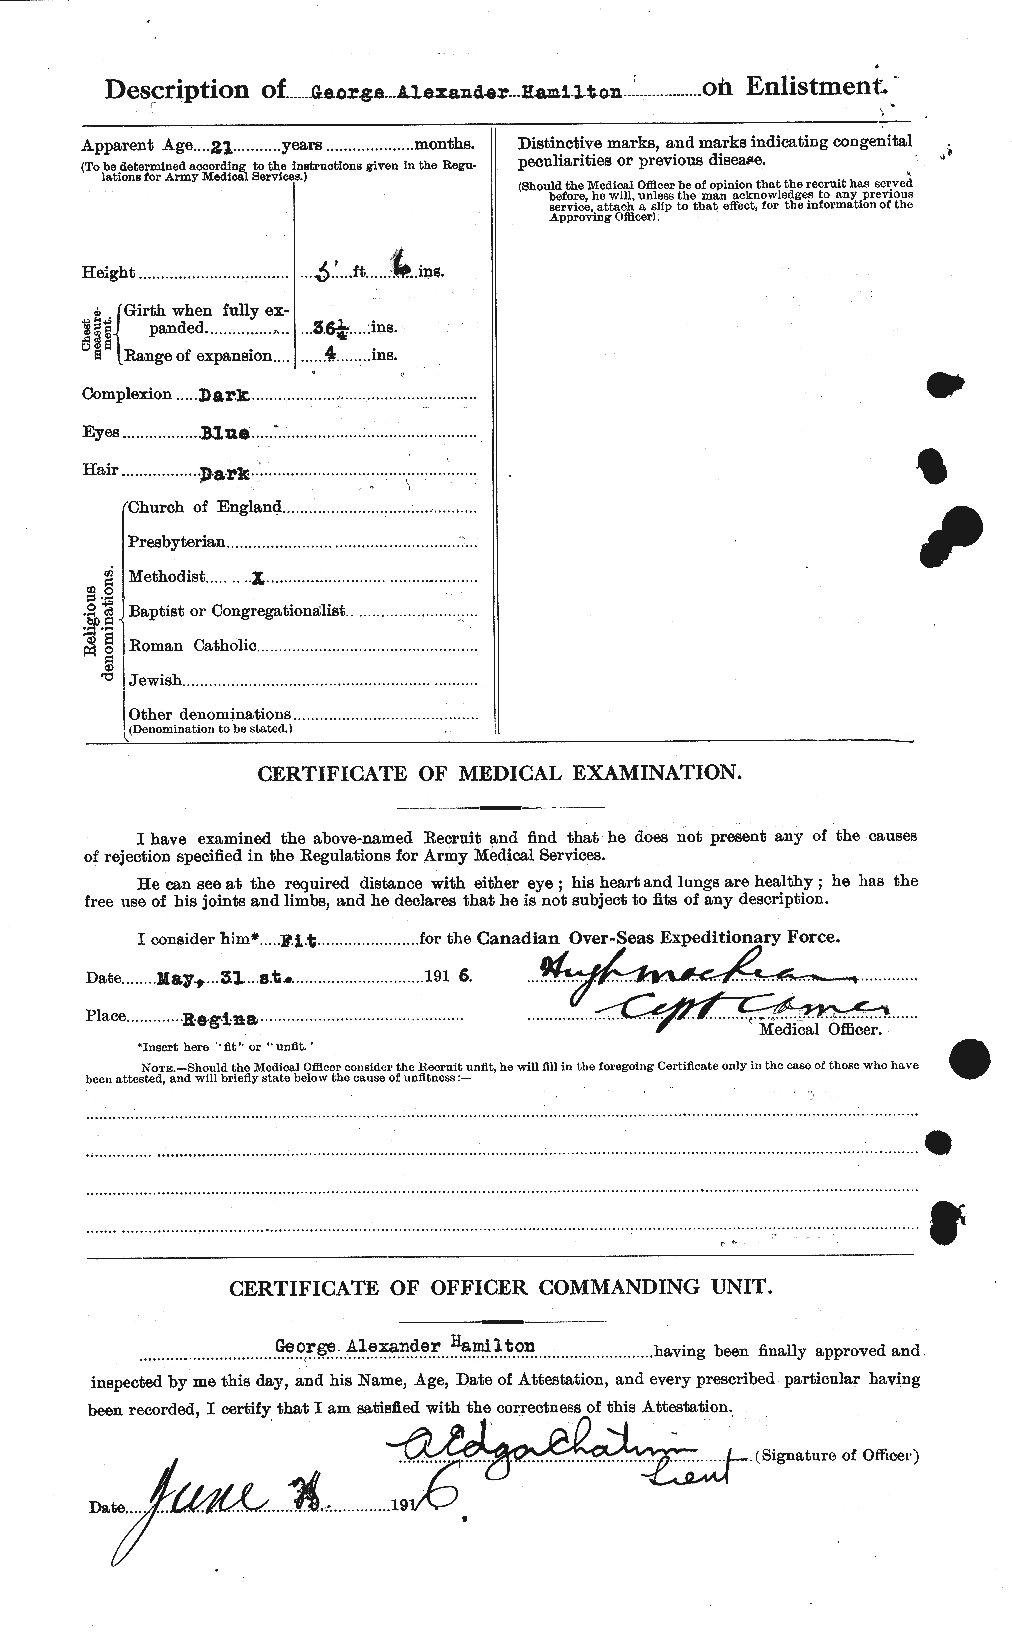 Personnel Records of the First World War - CEF 372446b